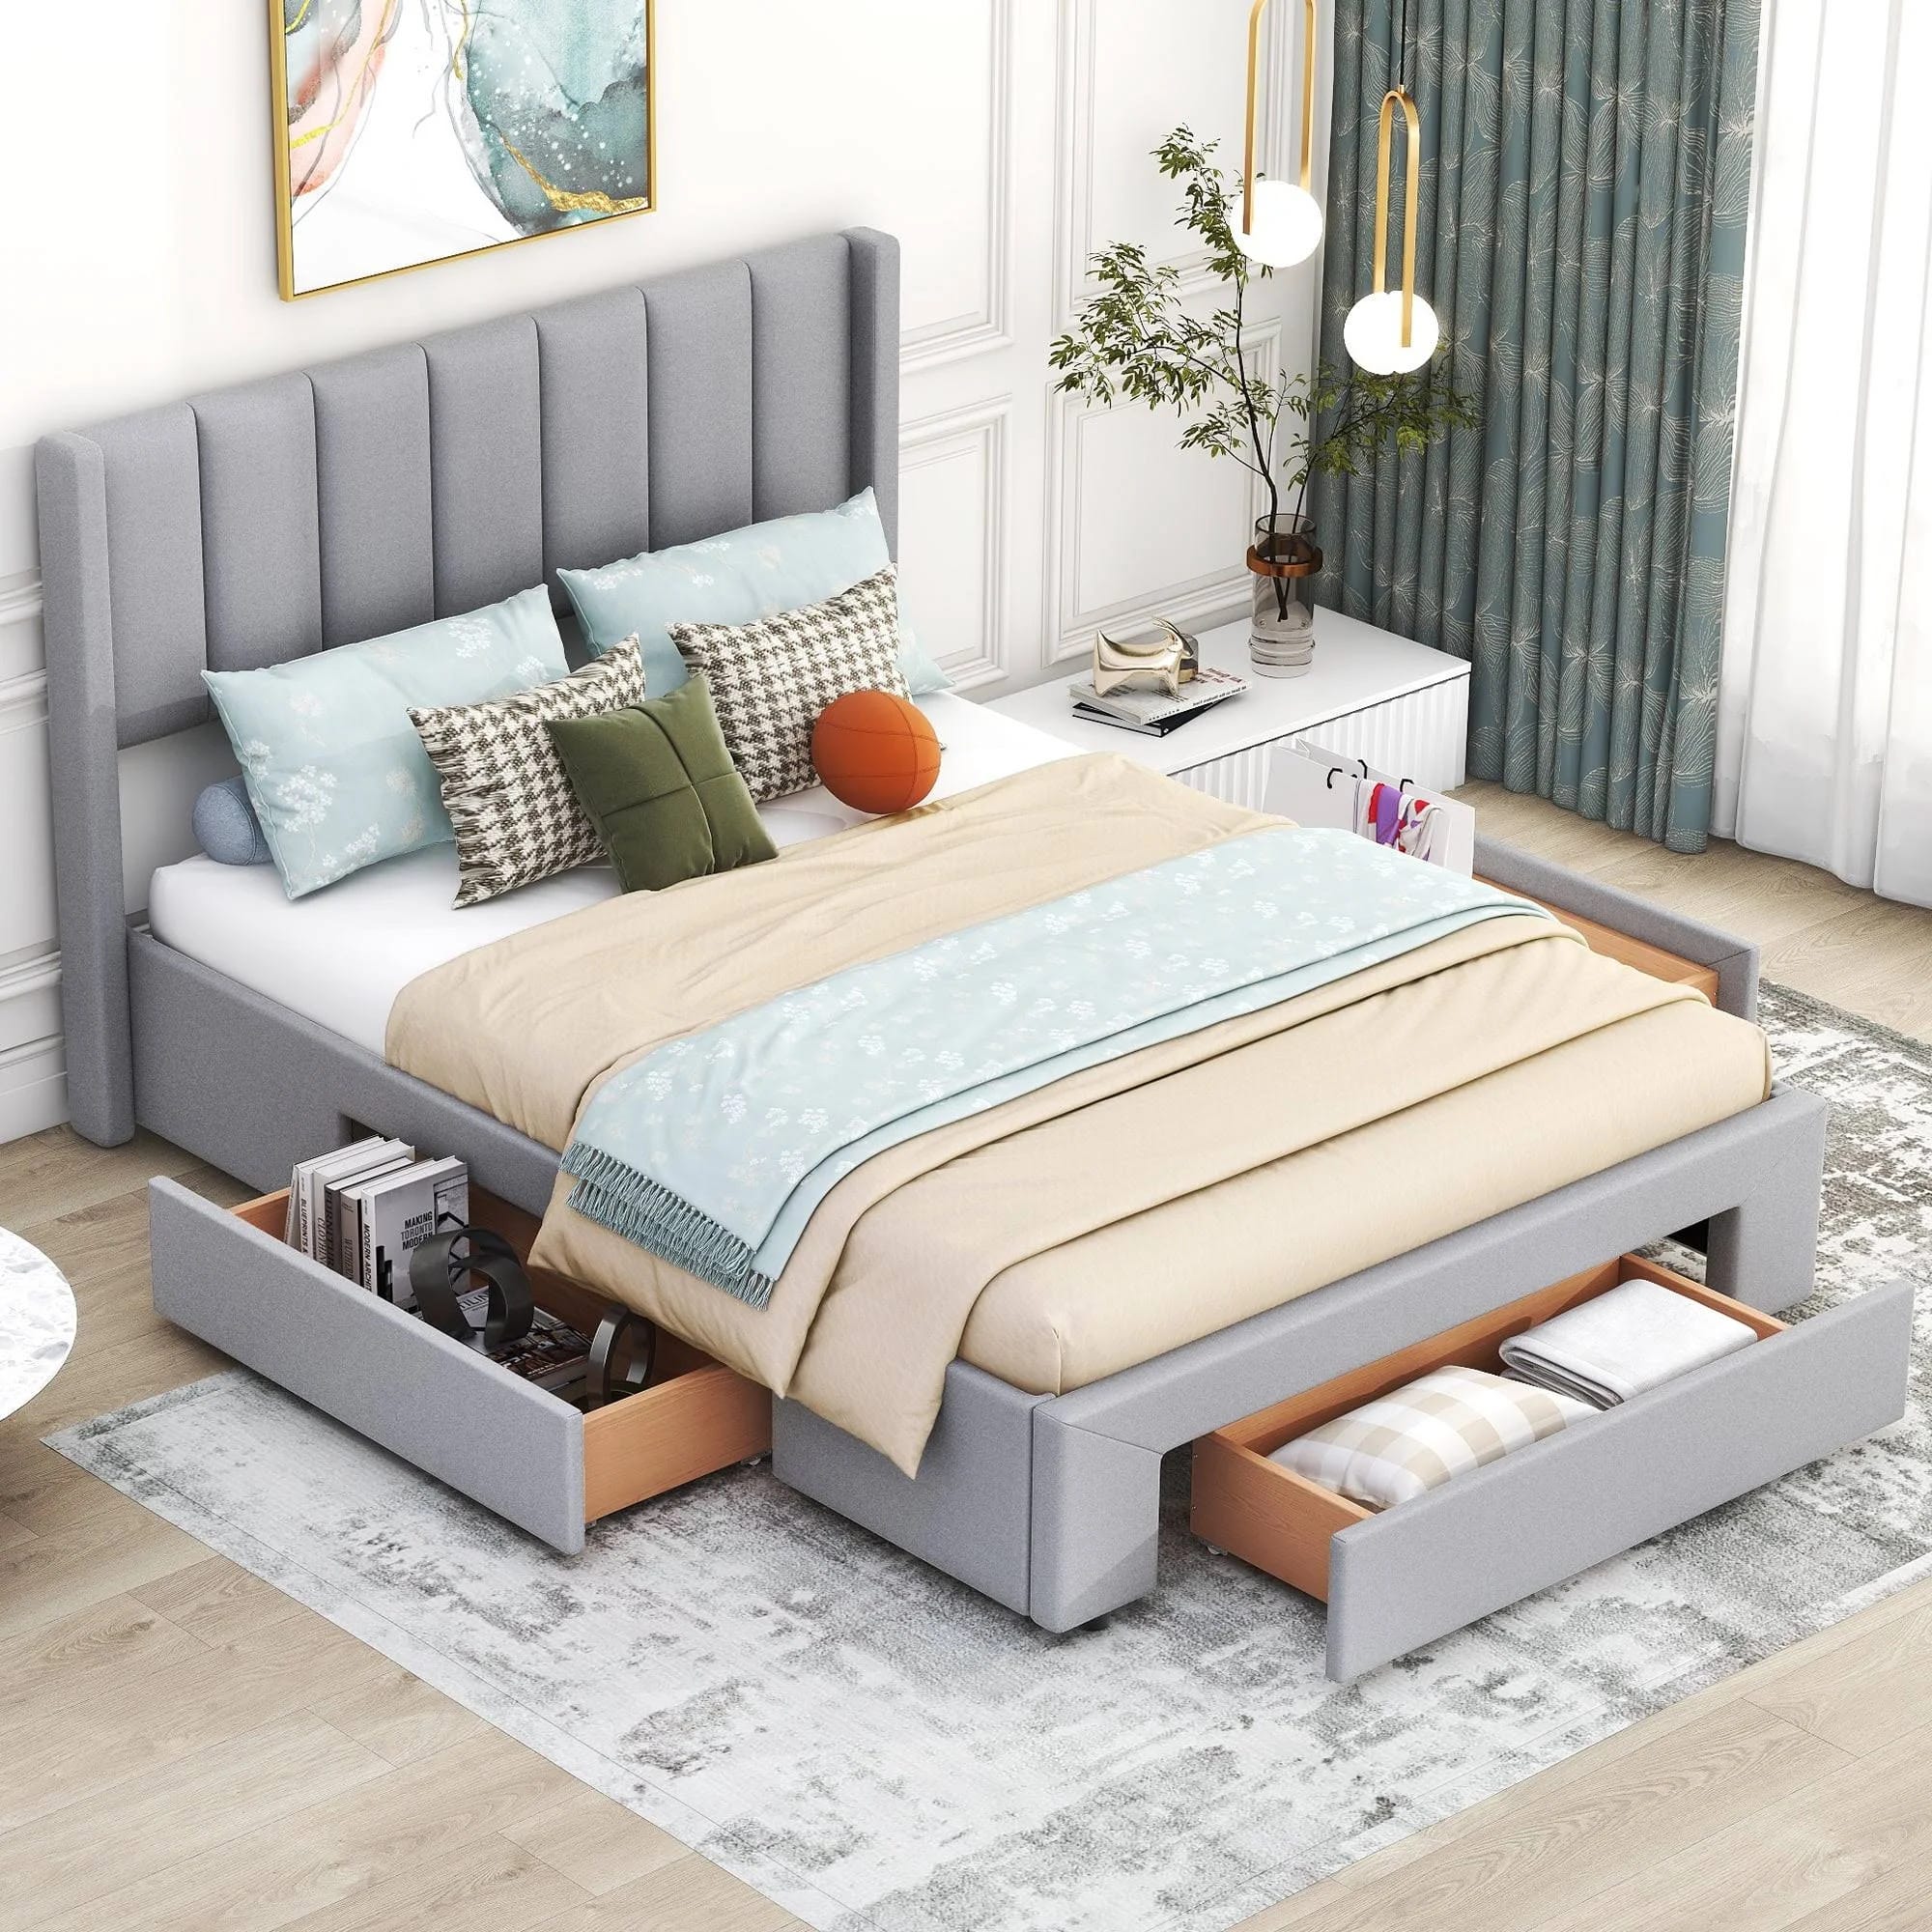 Euroco Full Double Platform Bed with Three Storage Drawers - Gray | Image